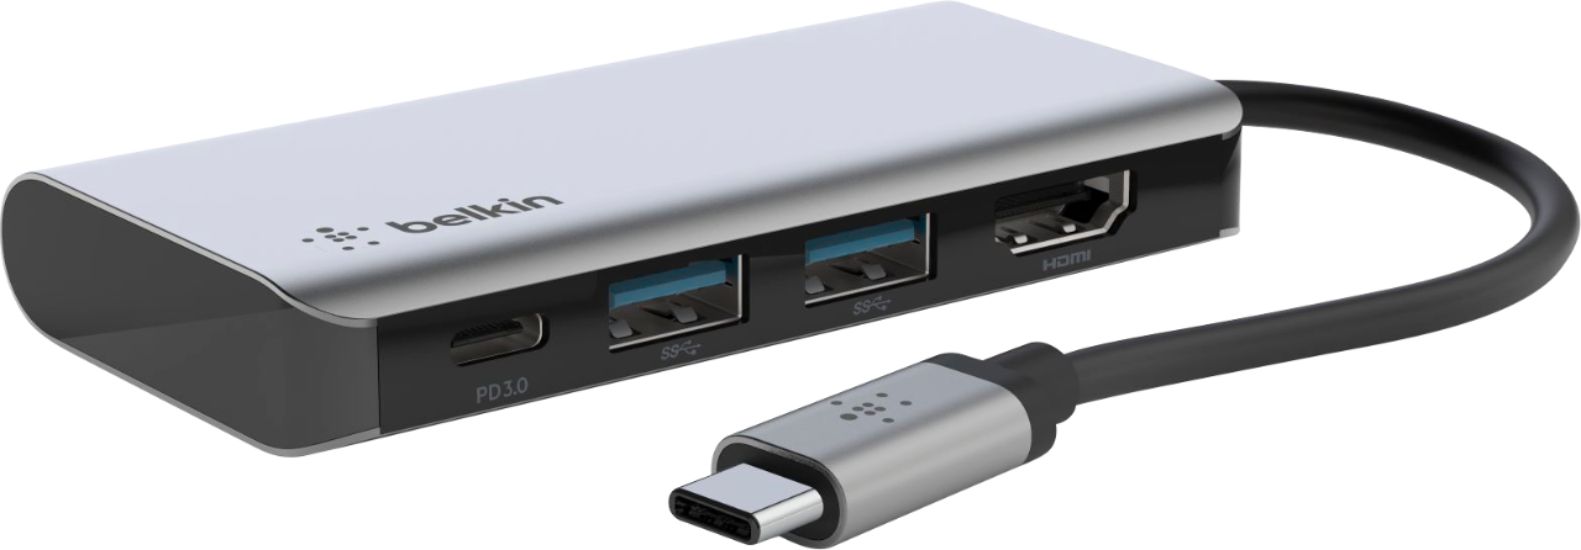 Questions and Answers: Belkin USB-C® 4-in-1 Multiport Adapter Gray ...